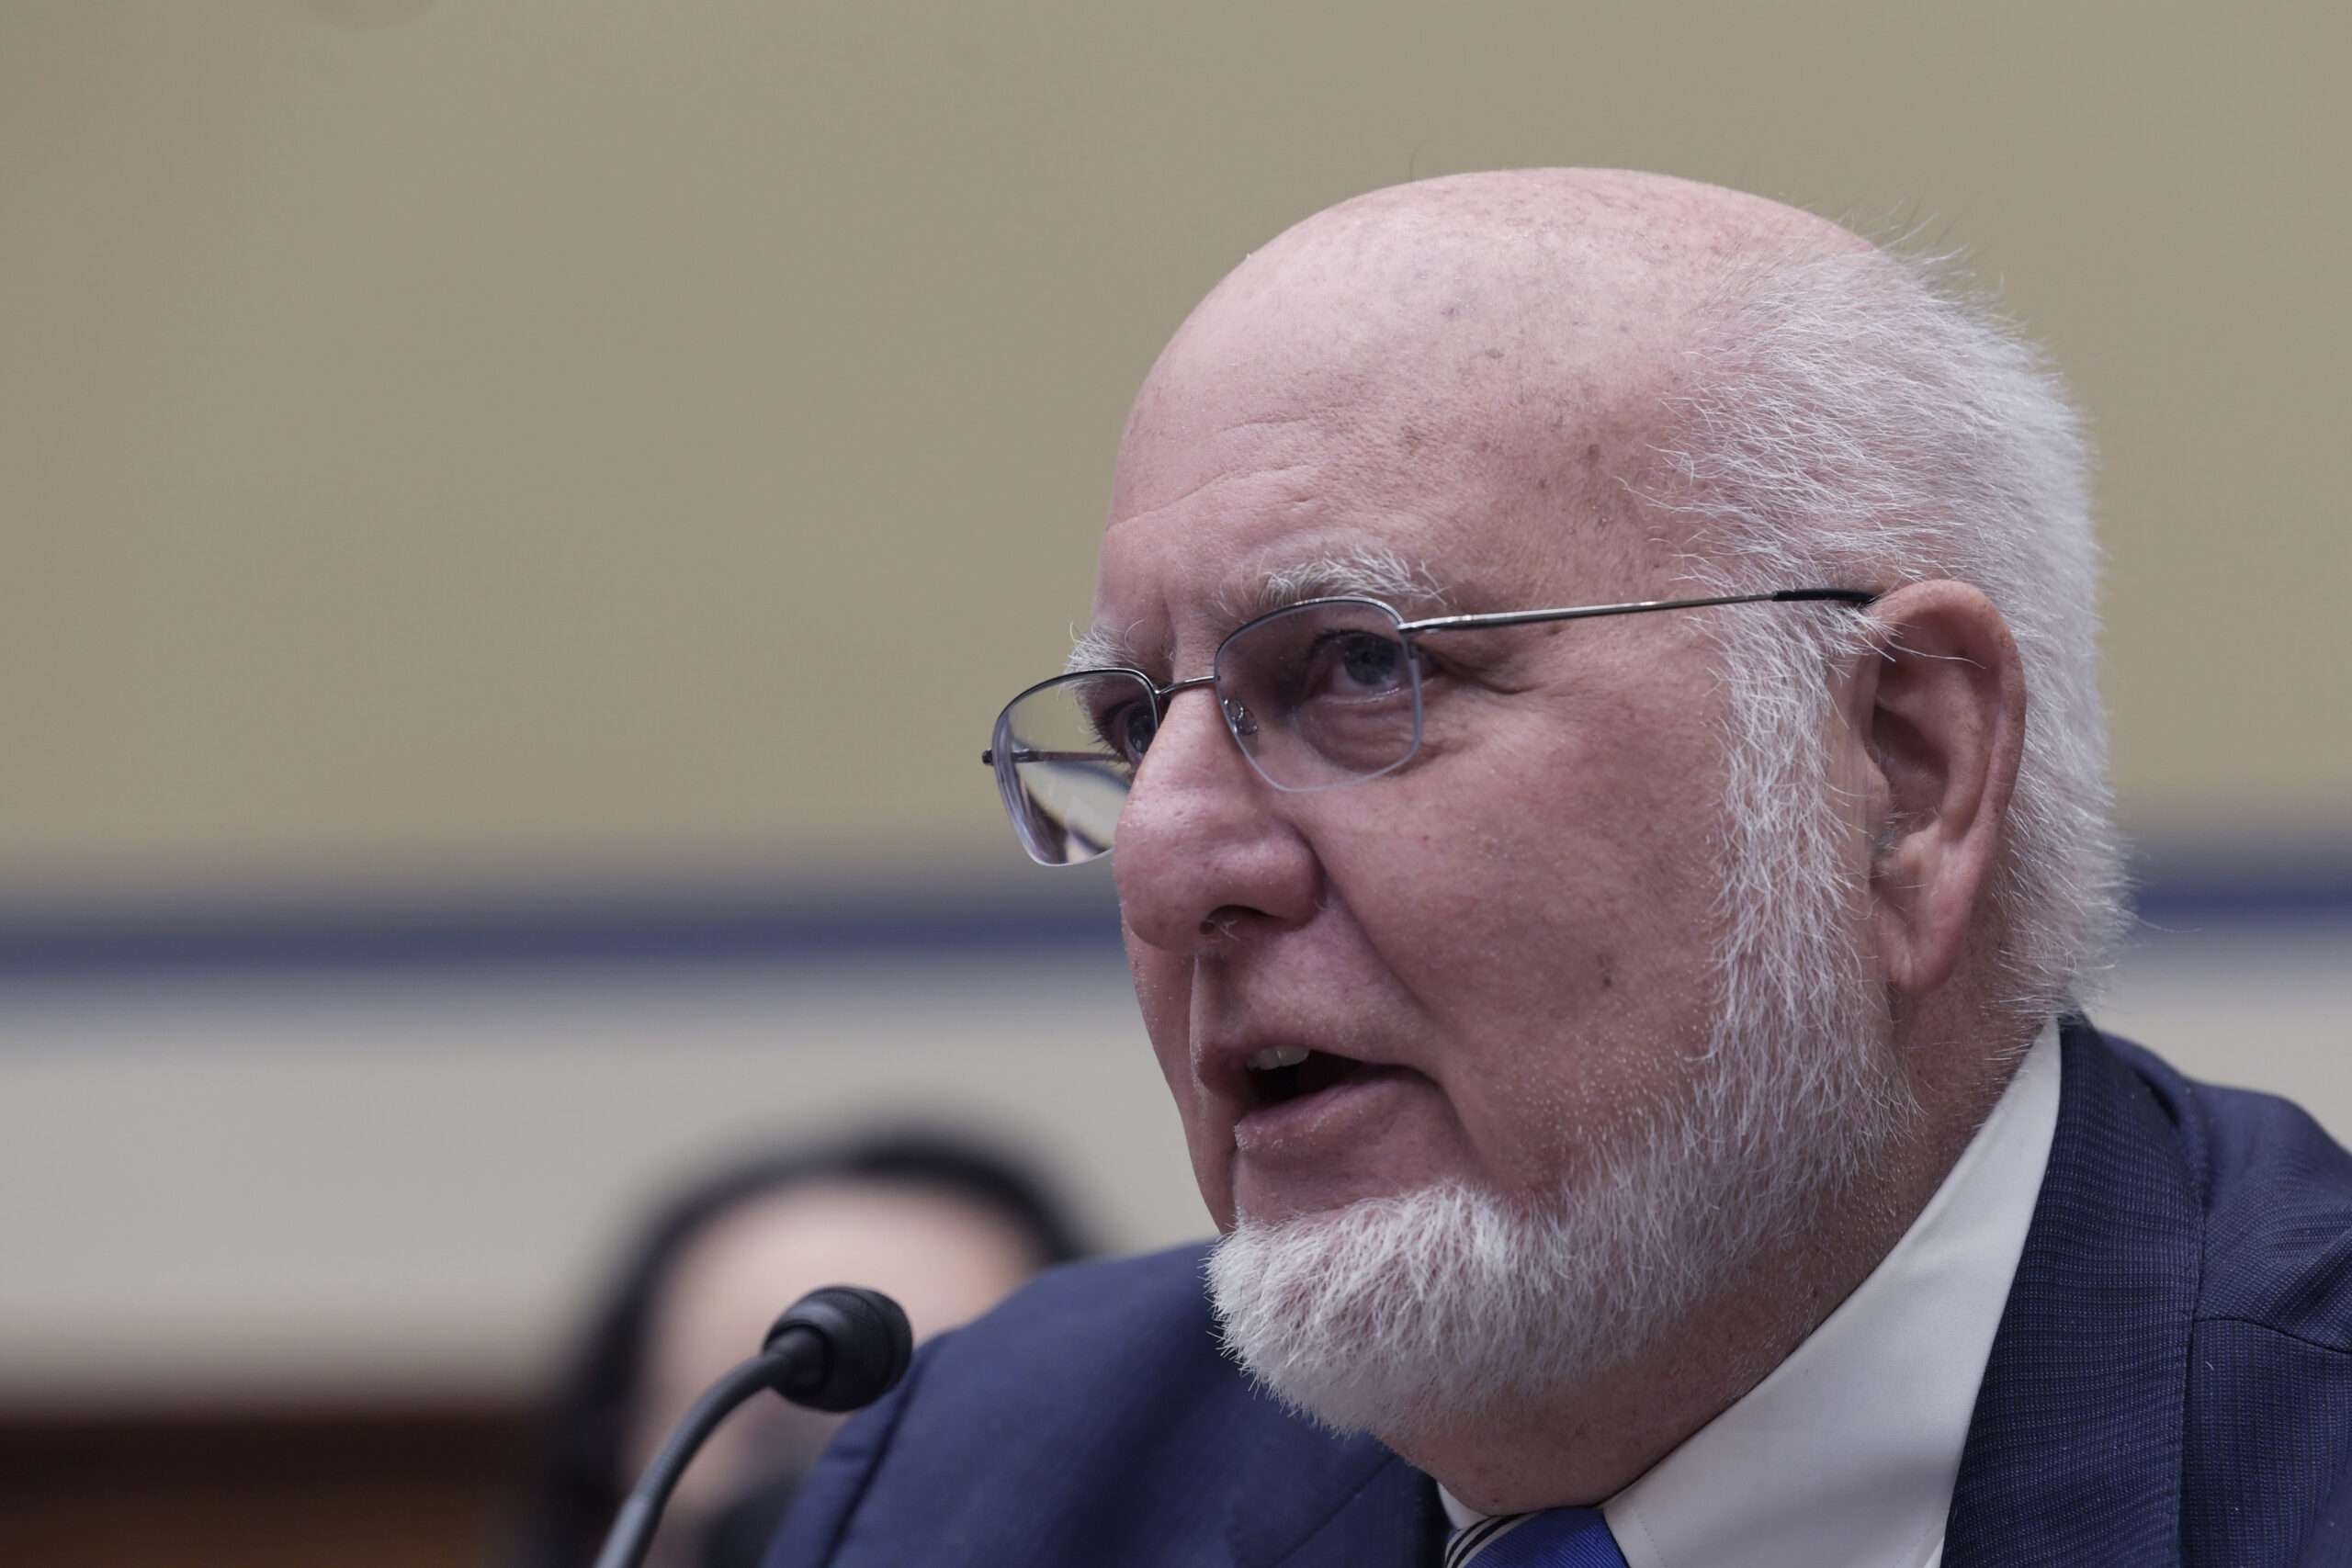 Former CDC Director Robert Redfield: 'NIH leadership was antithetical to science'